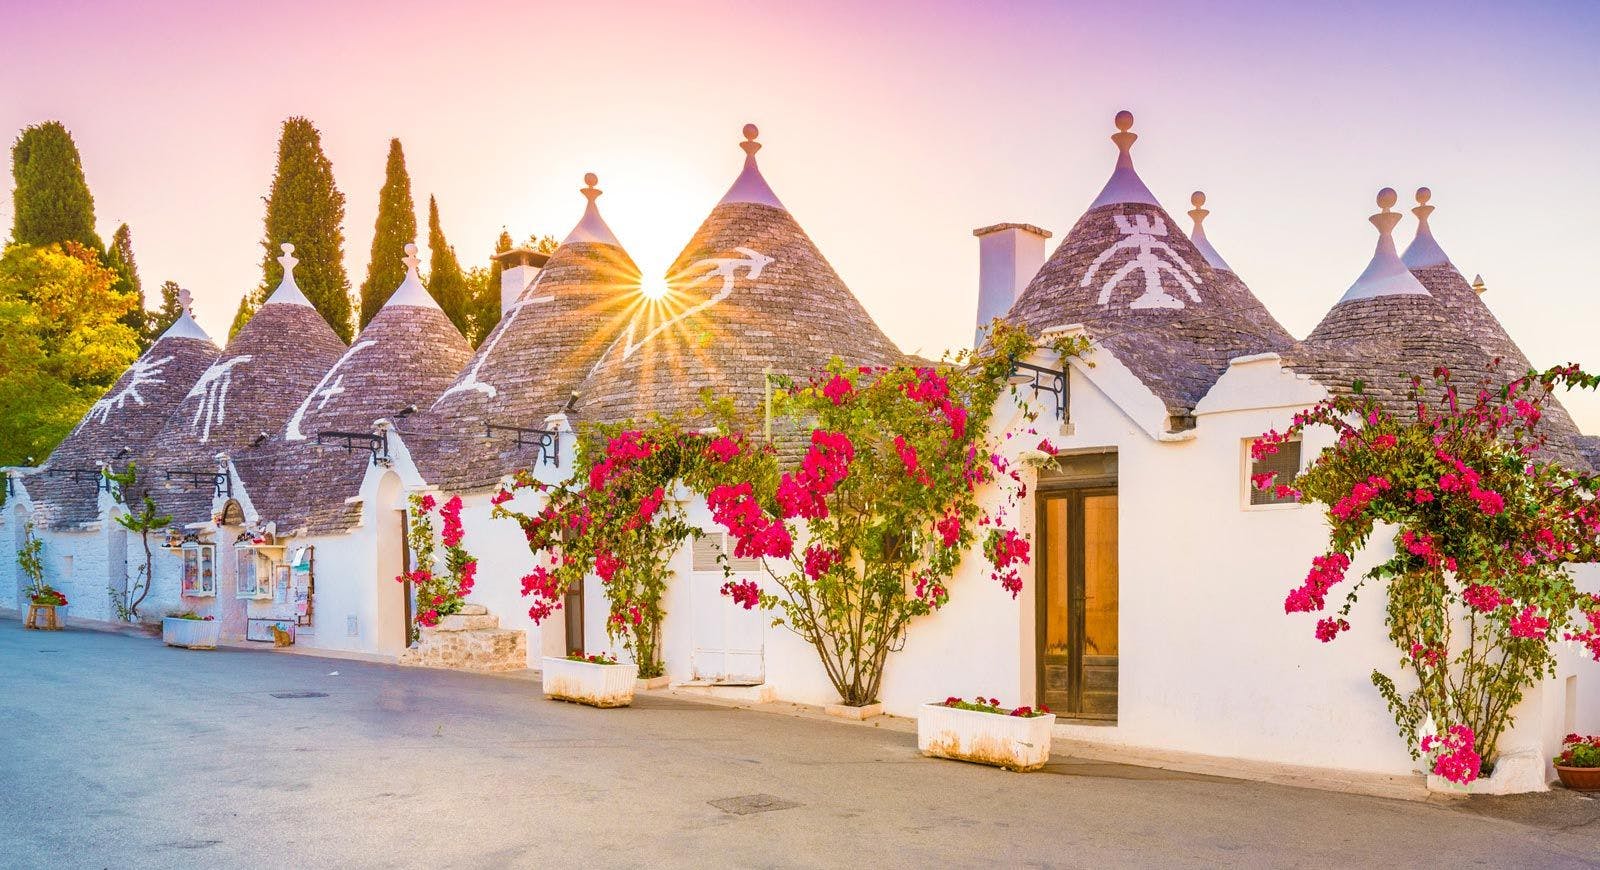 Traditional conical trullo houses in Puglia, Italy